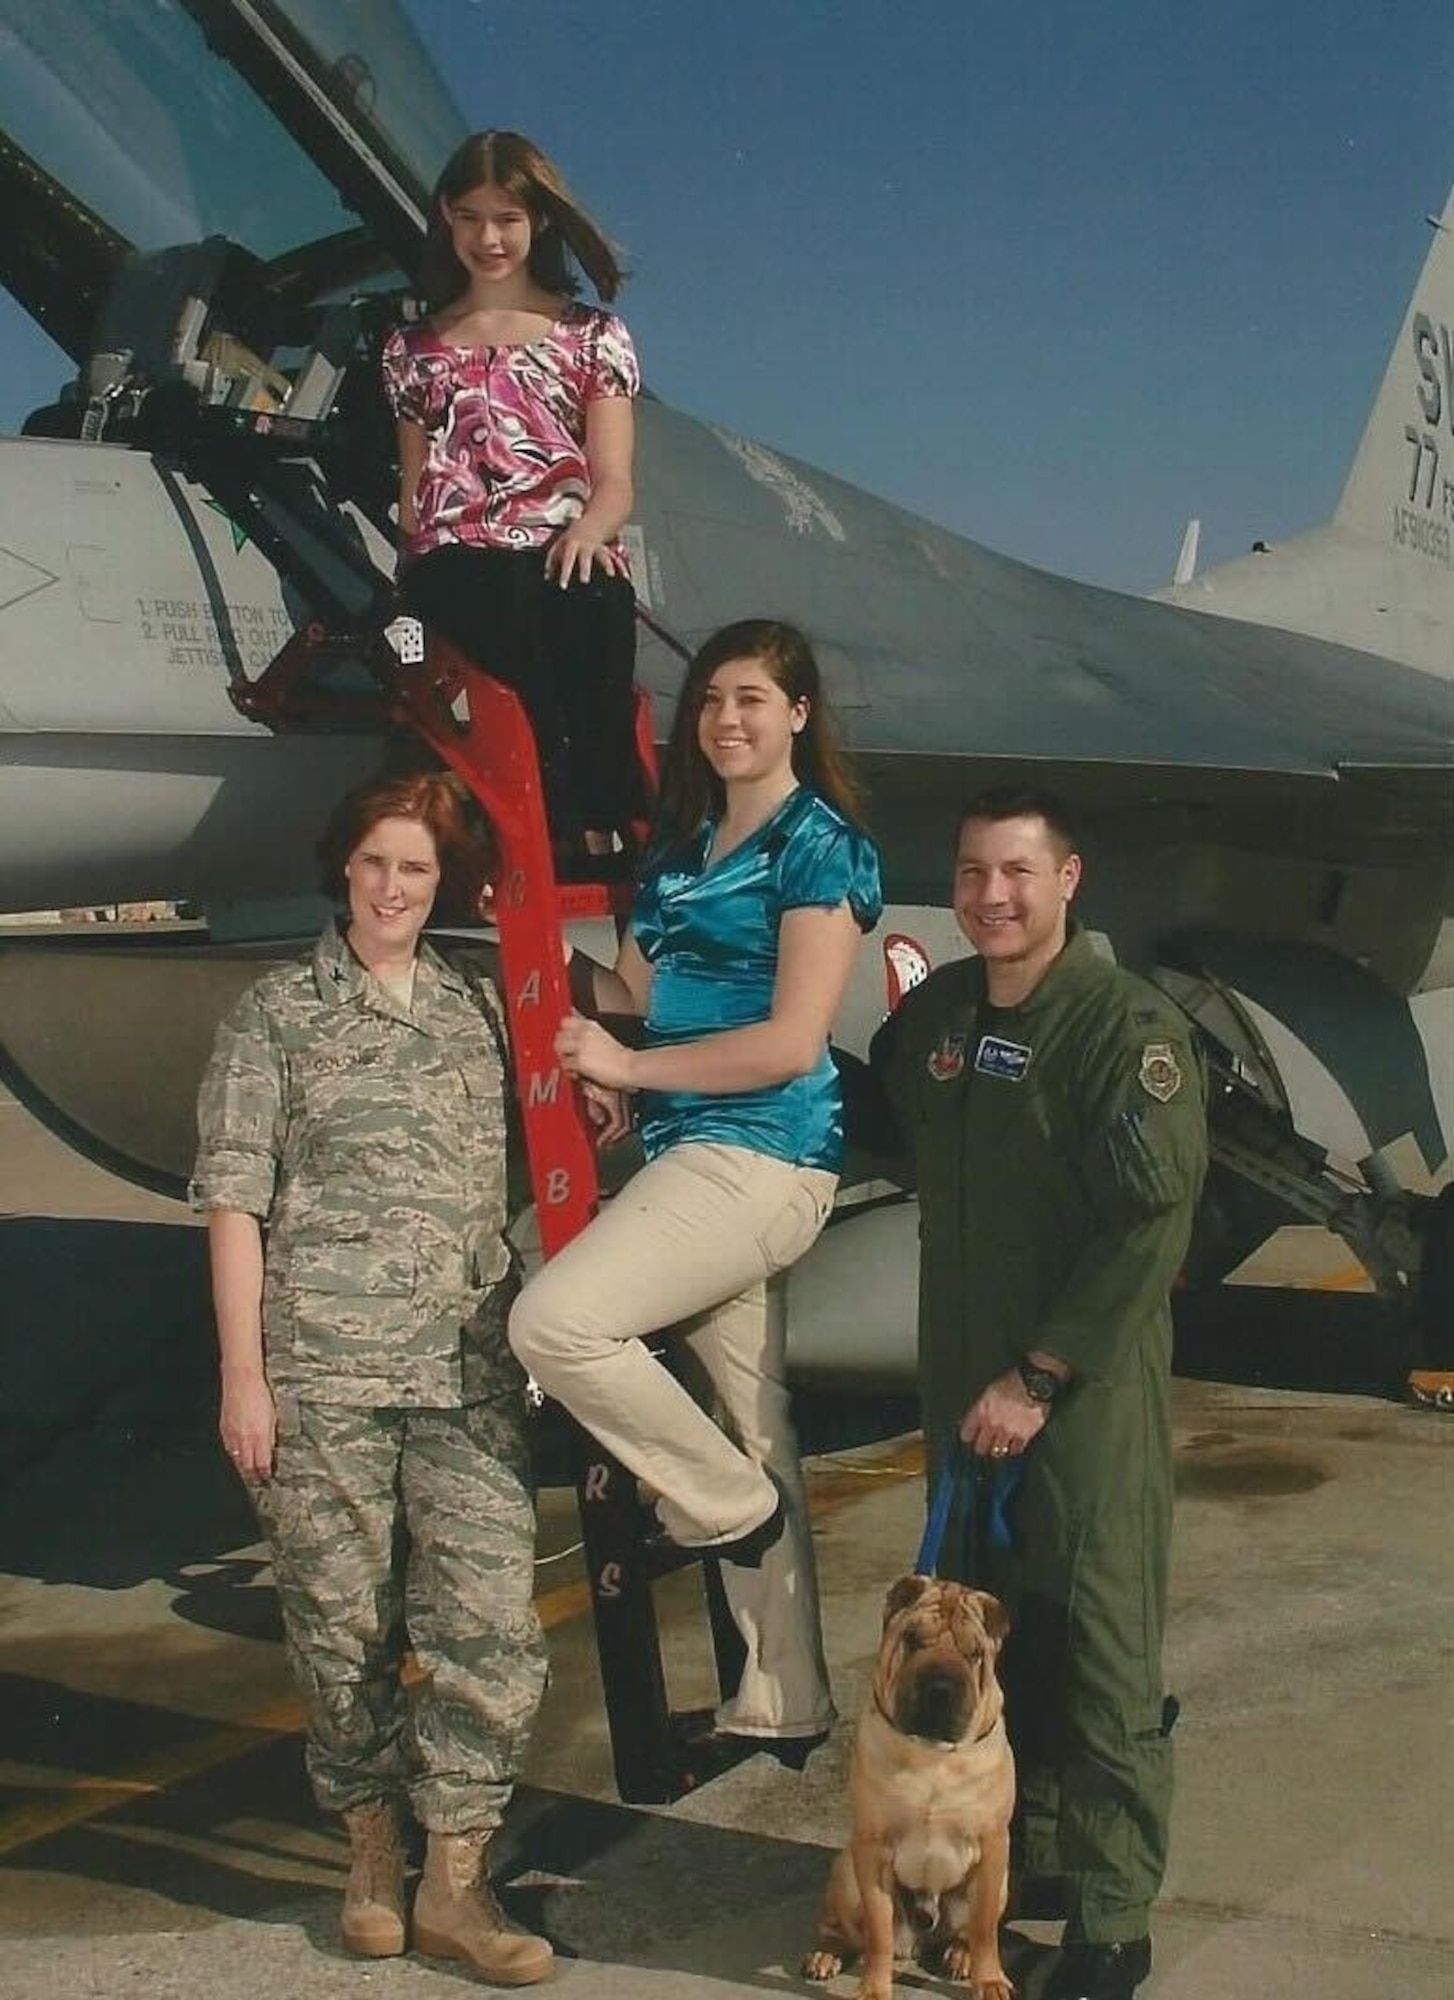 A family poses in front of a jet.